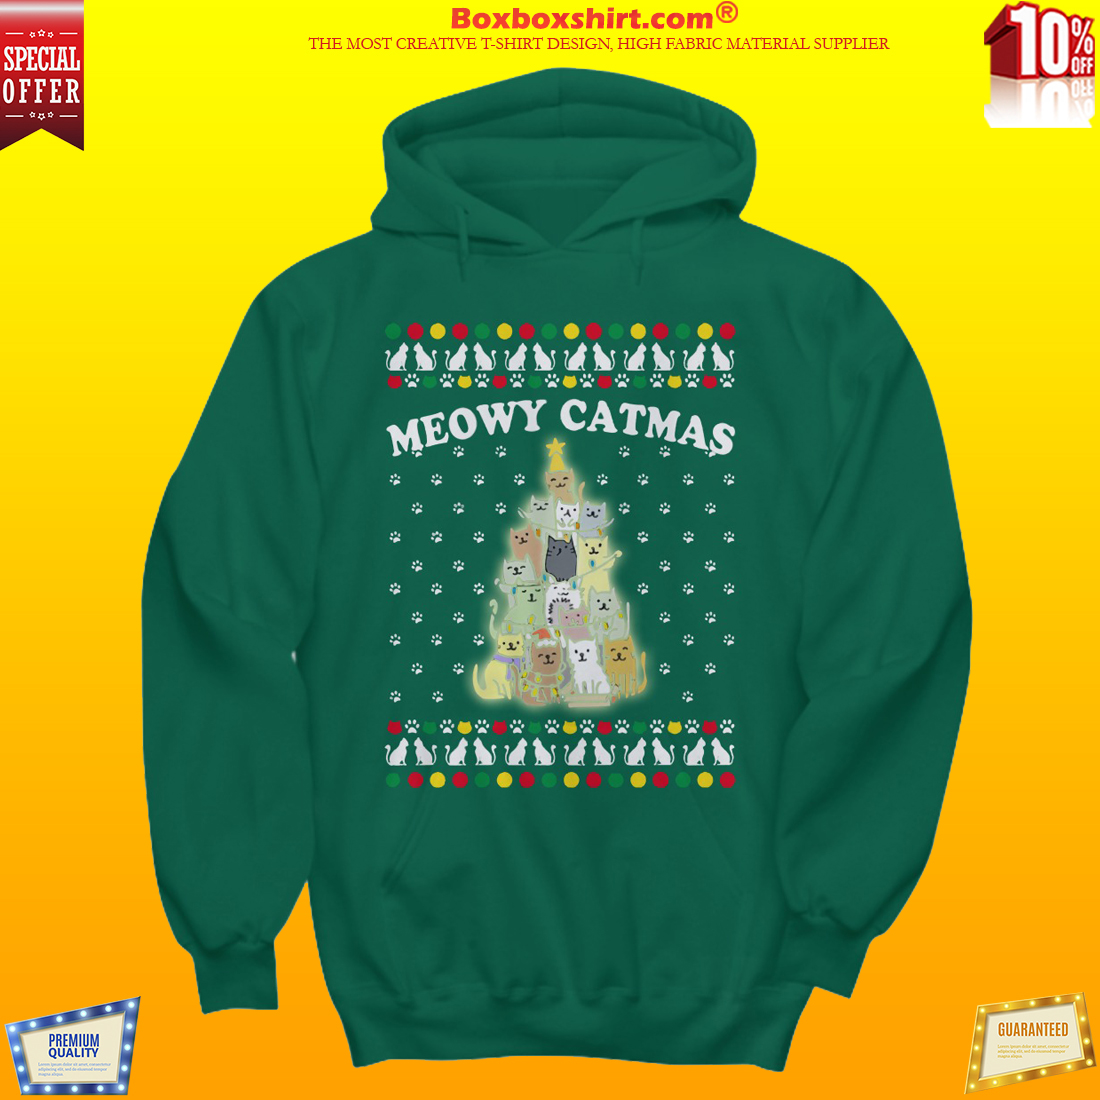 Meowy Catmas ugly Christmas sweater and hoodies